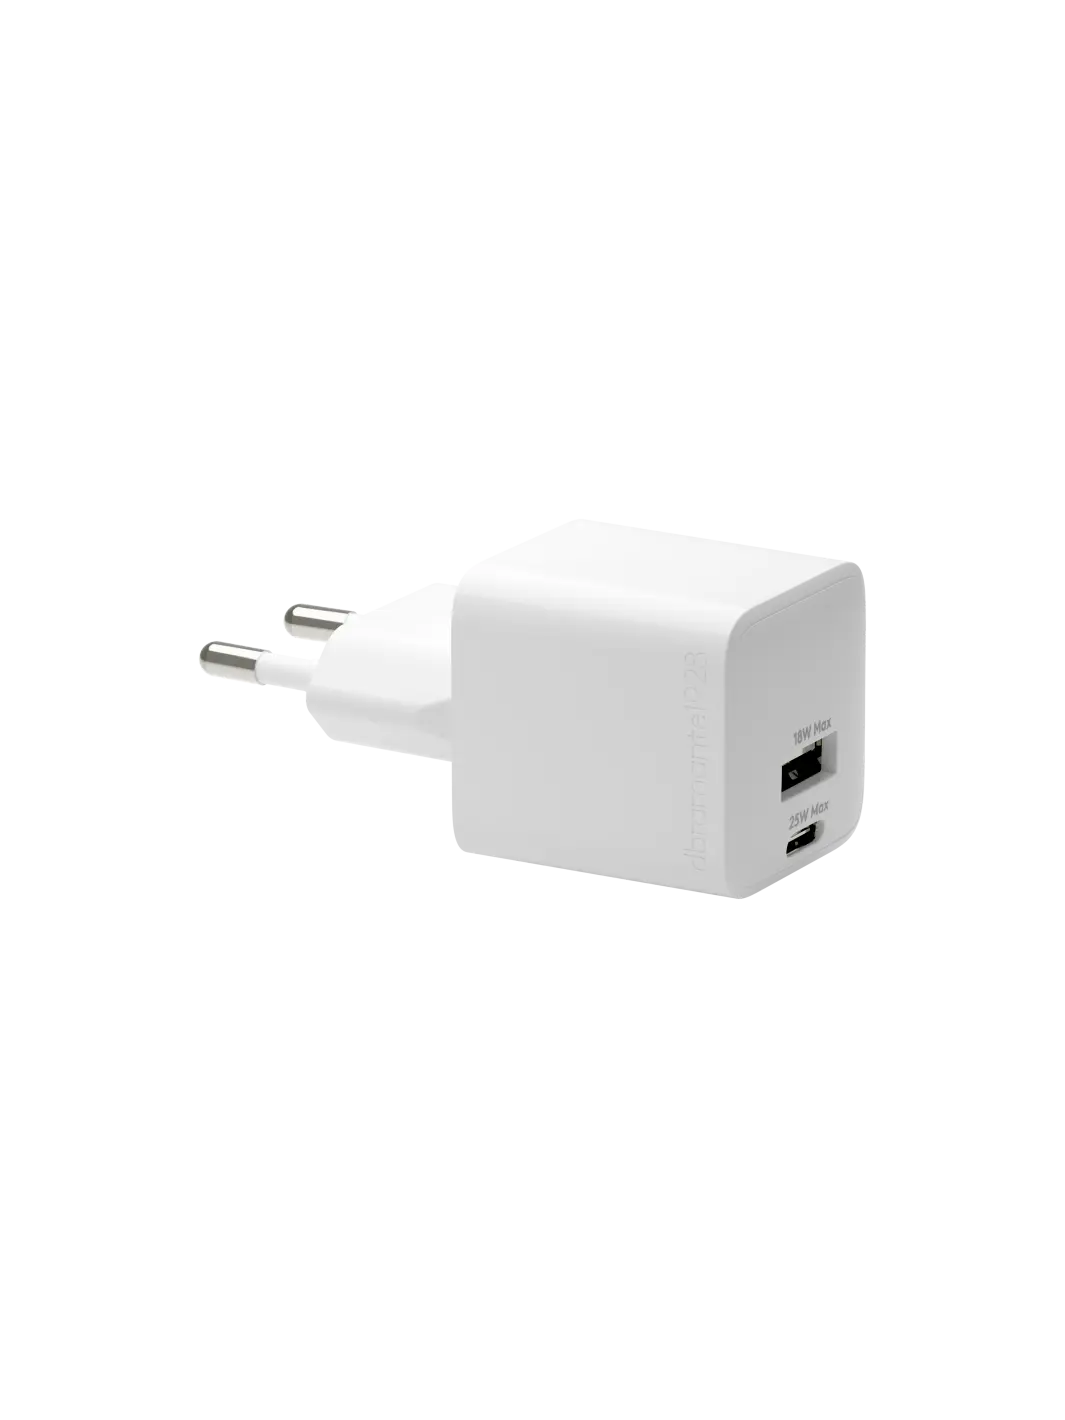 WALL CHARGERS S White 25W+18W 7,1 x 3,3 x 3,6 cm Wall chargers